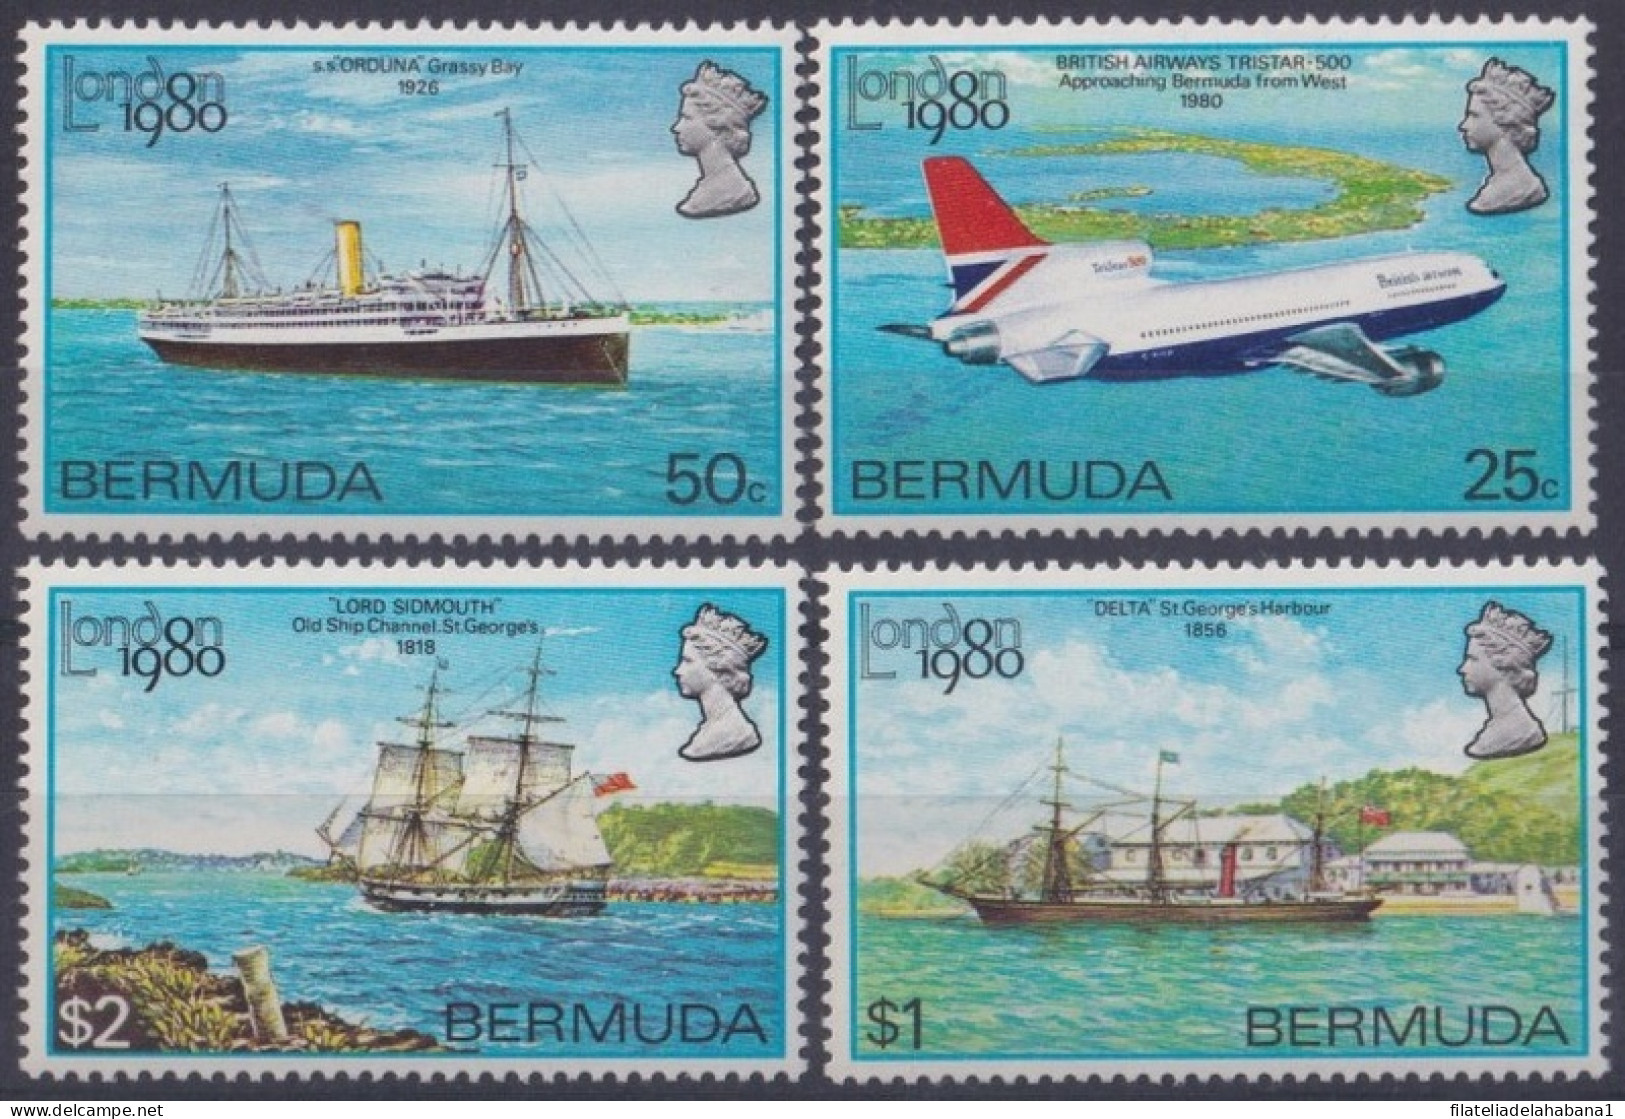 F-EX49865 BERMUDA IS MNH 1980 LONDON EXPO AIRPLANE SHIP BARCOS BOAT.  - Barcos